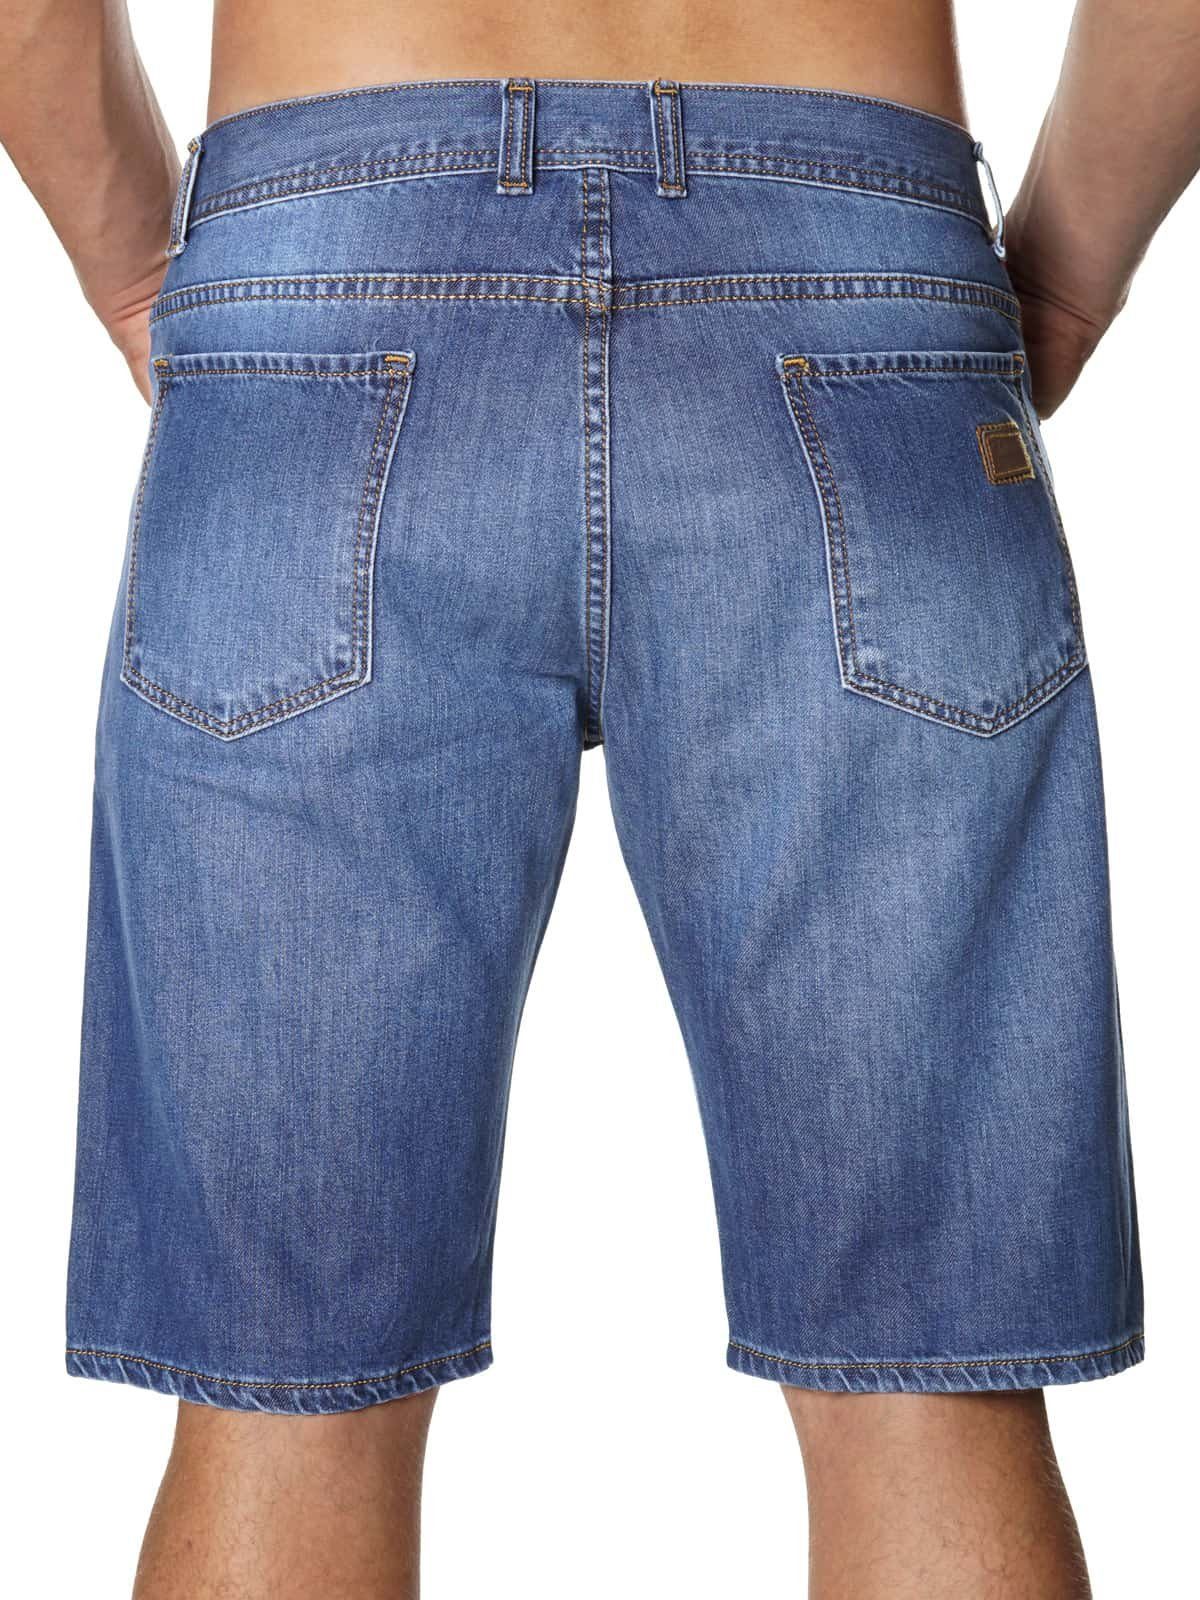 Stanley Jeans Jeansshorts Herren Chino 22743 Jeans (1-tlg) Shorts 011